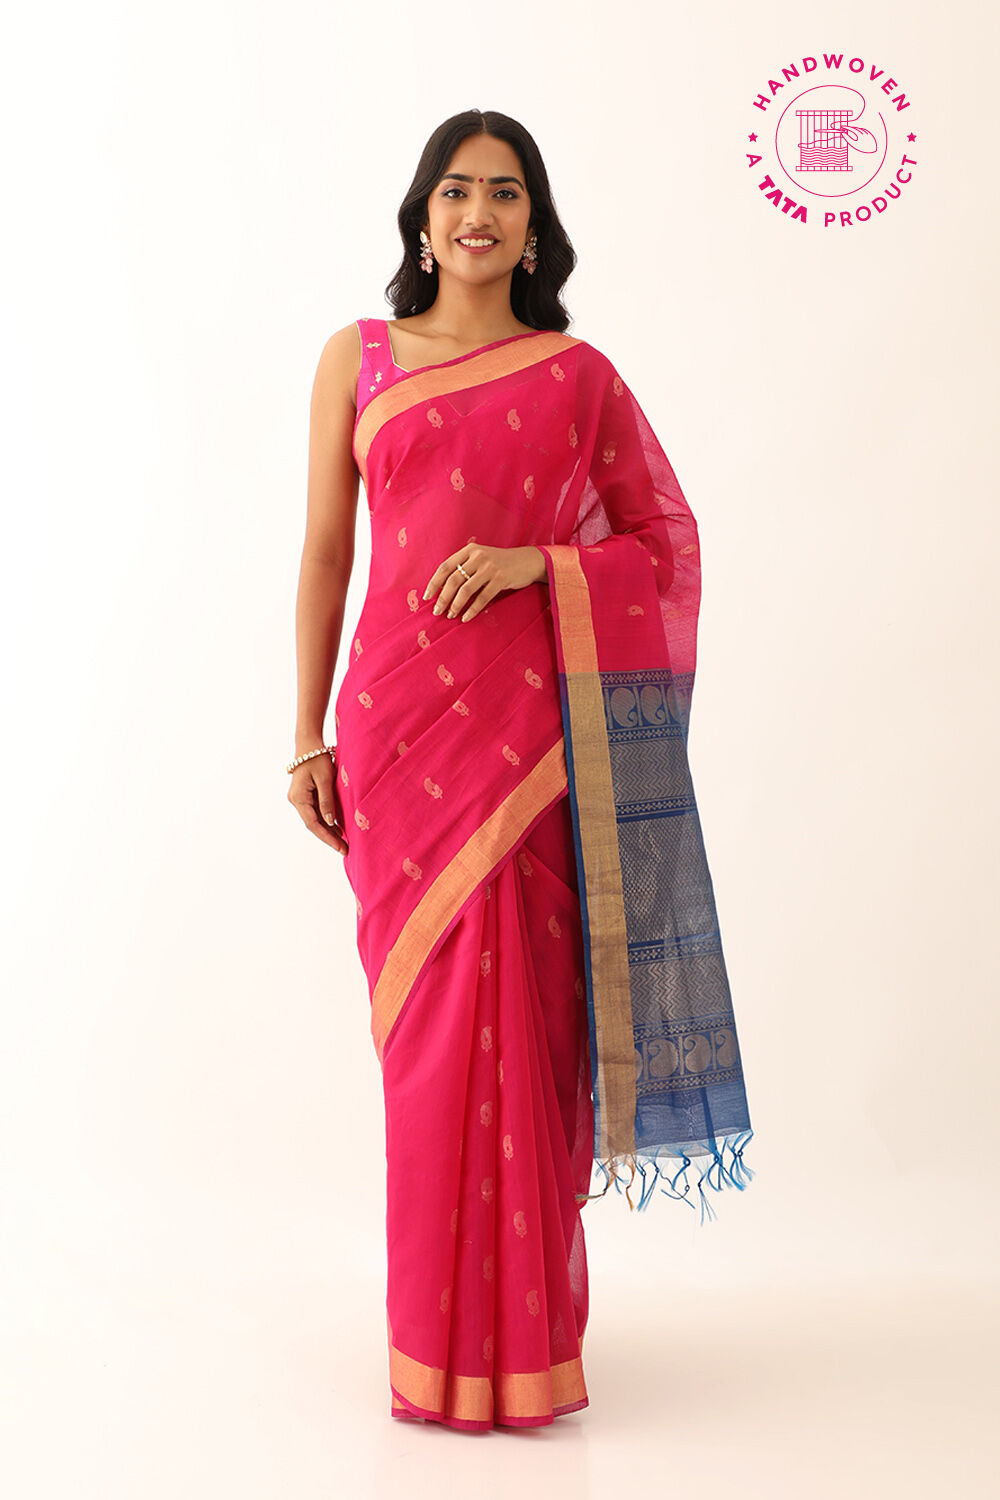 Taneira Sarees: a sustainable fashion brand by Ambuj Narayan |  IndianRetailer.com posted on the topic | LinkedIn